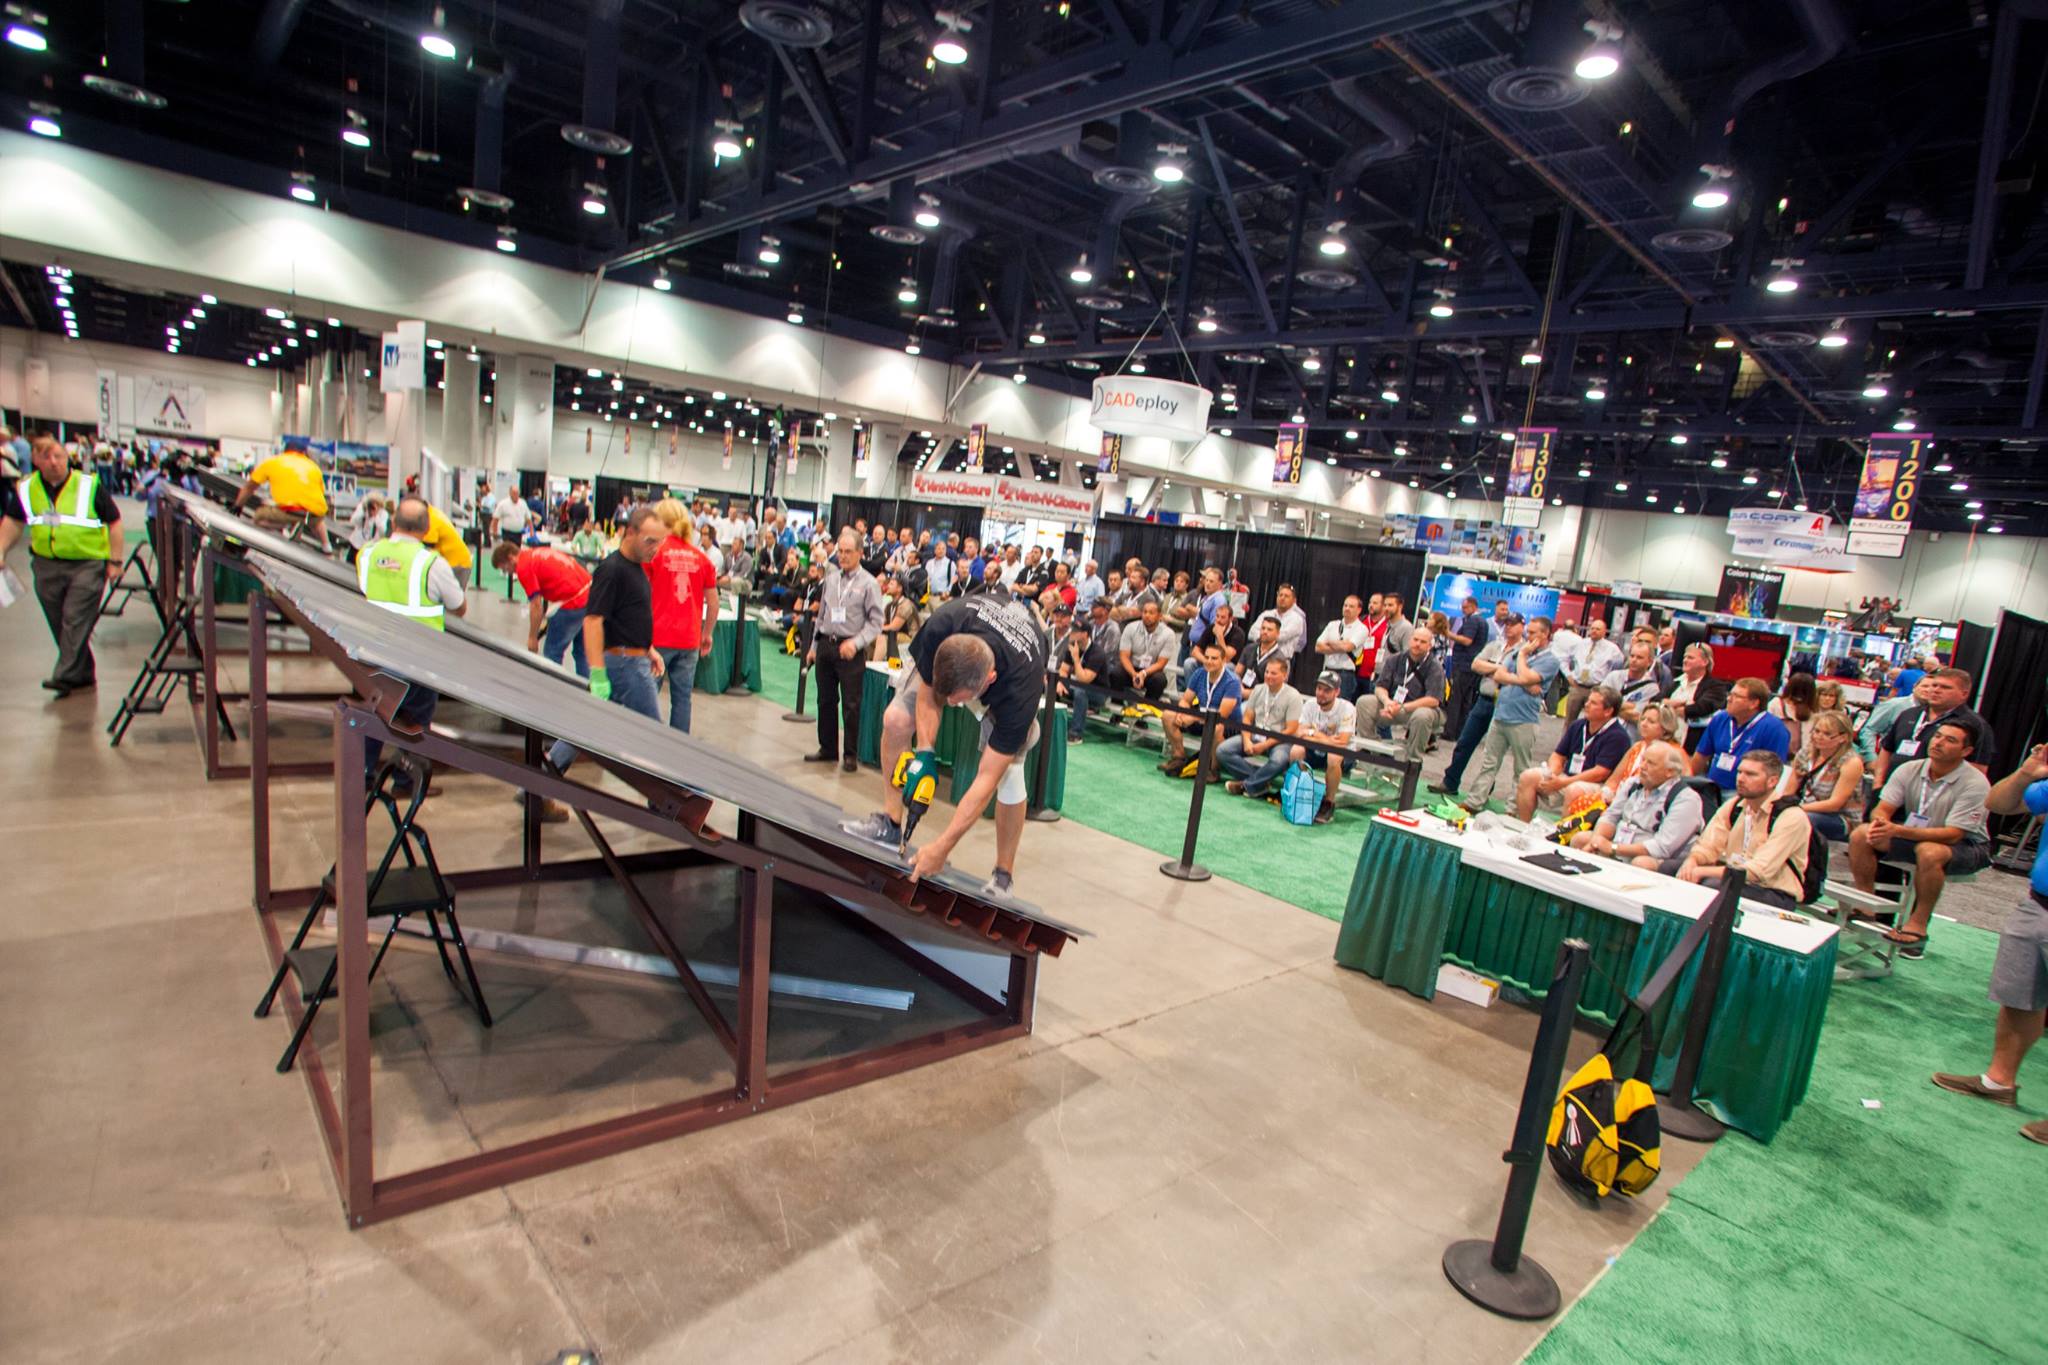 May - IndNews - Roof Hugger - Preregistration is Open for the 2018 MCA METALCON National Metal Roofing Championship Games